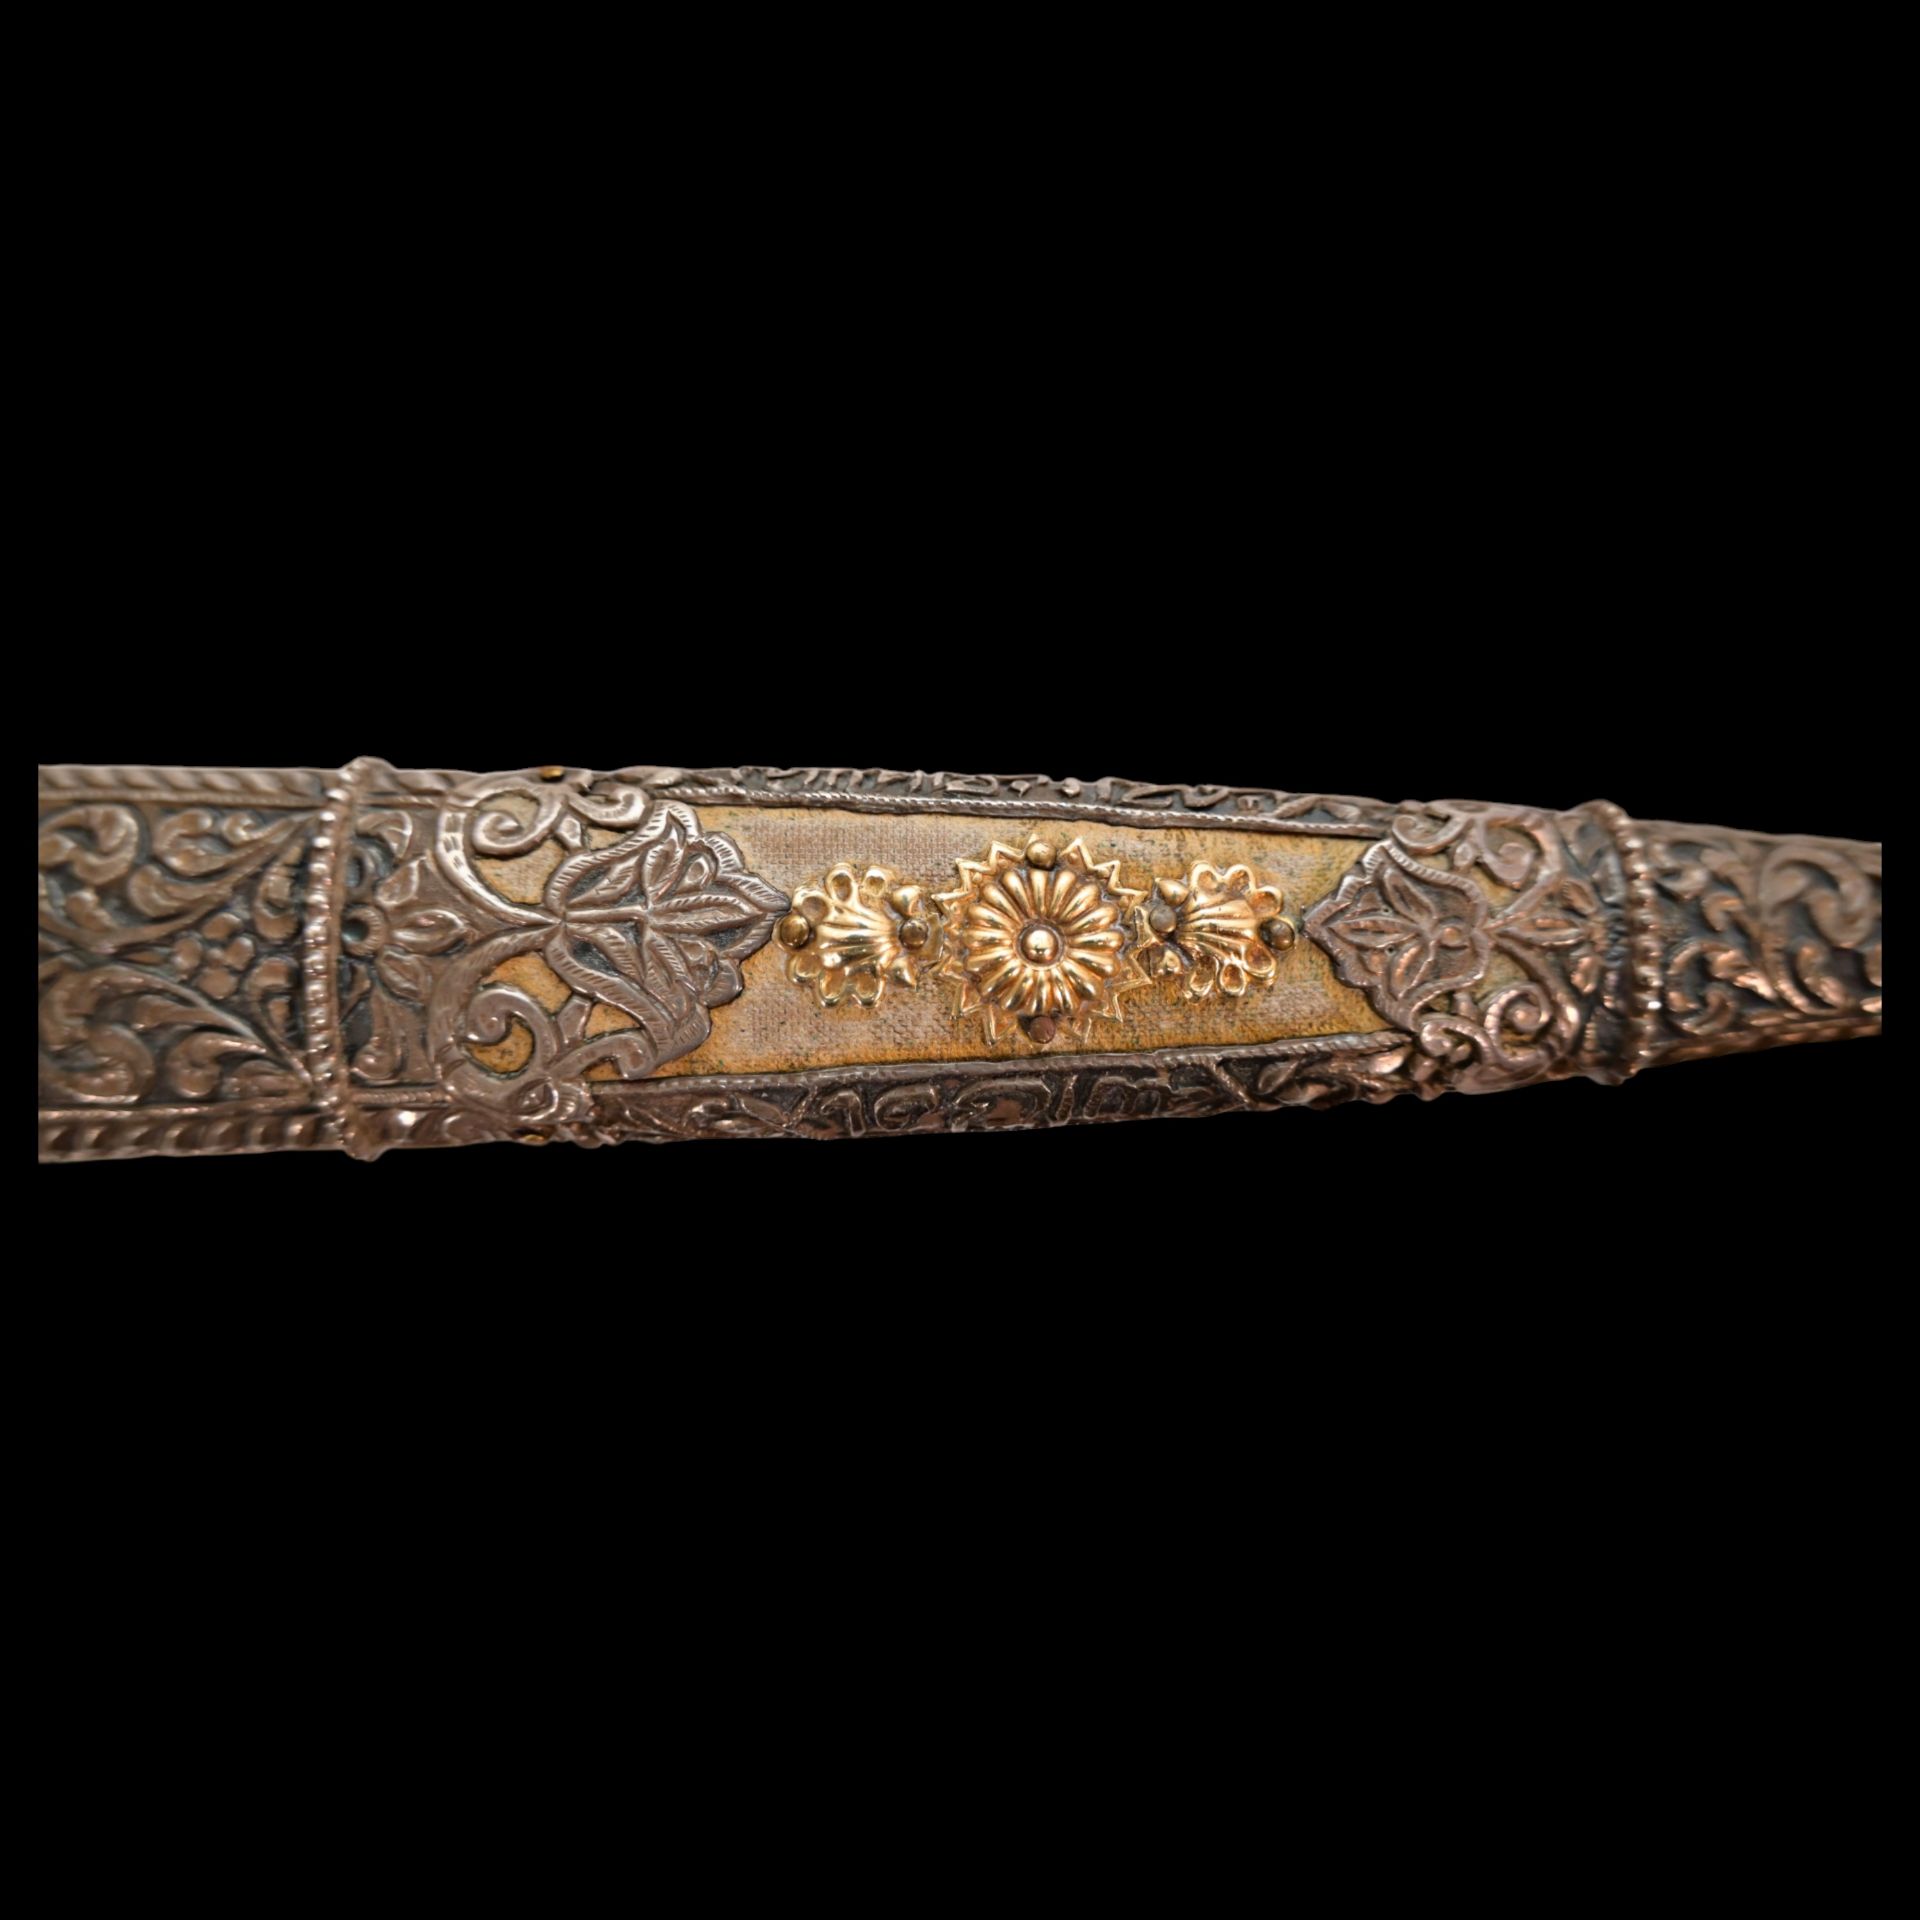 A PERSIAN ZAND DYNASTY KARD DAGGER WITH WOOTZ BLADE AND GOLD INLAY. - Image 16 of 27